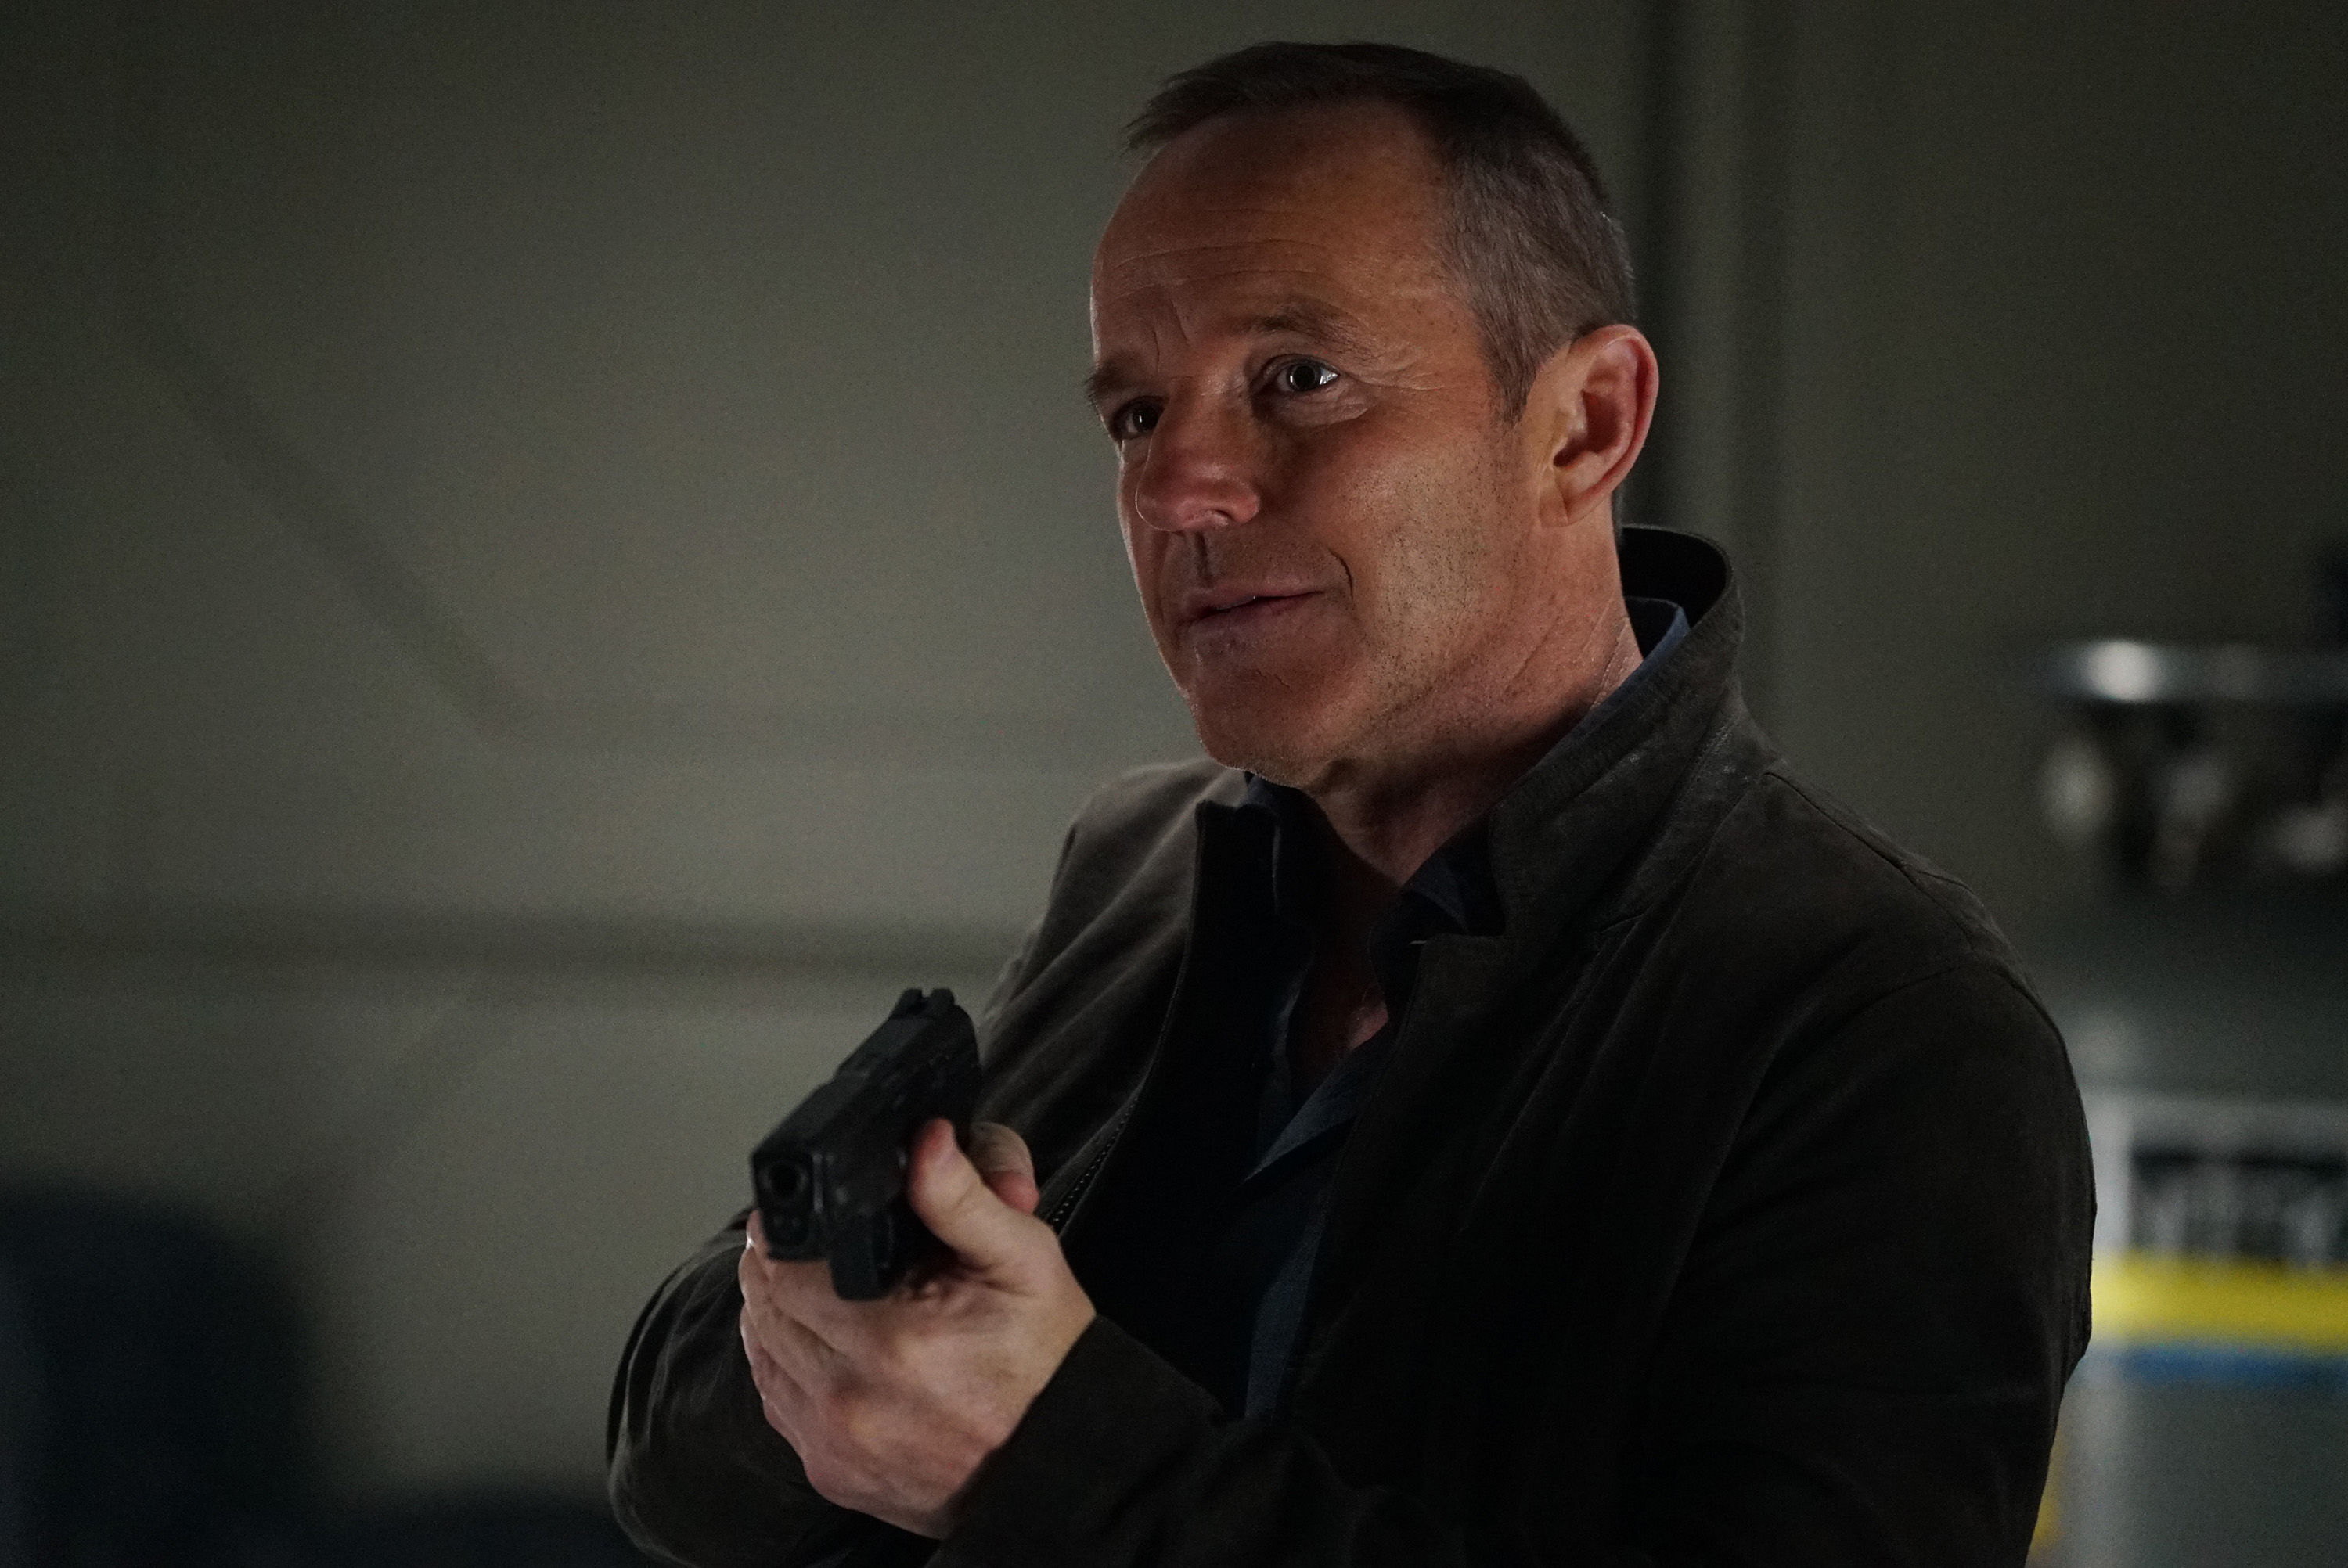 Watch Agent Phil Coulson return to SHIELD in new 'Captain Marvel' trailer